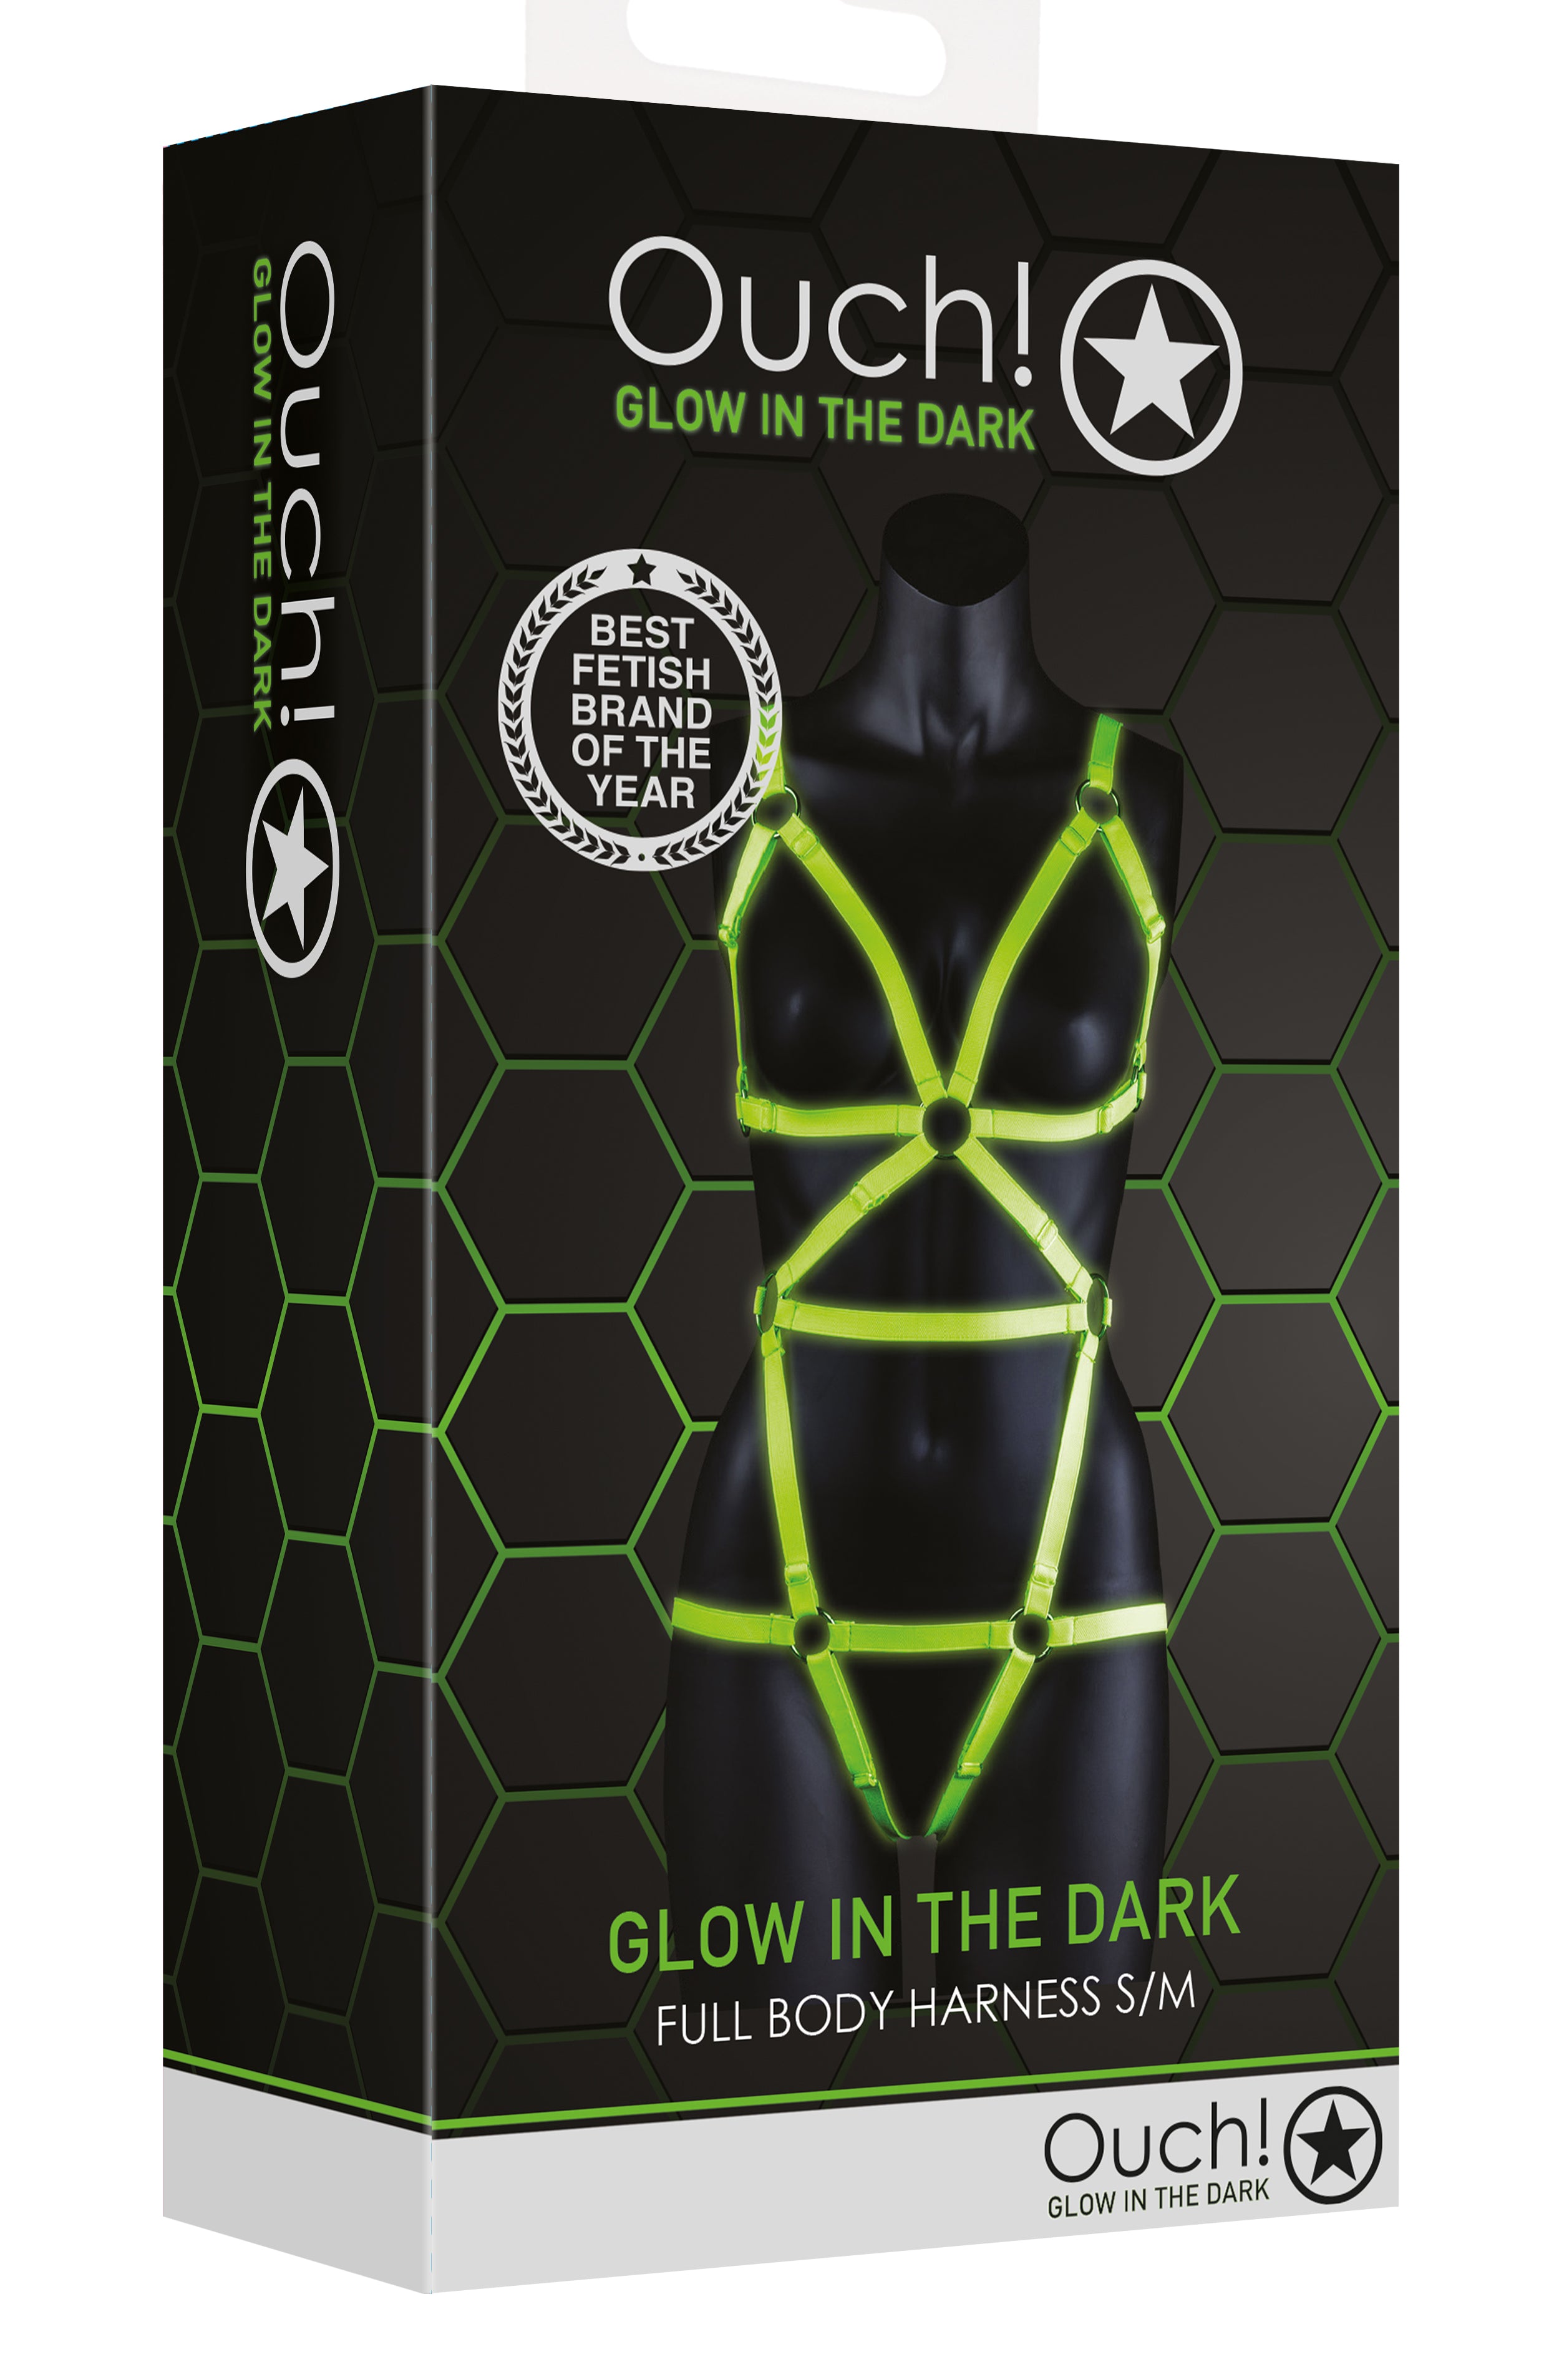 Ouch! Glow in the Dark Full Body Harness S/M: Illuminate Your Desires